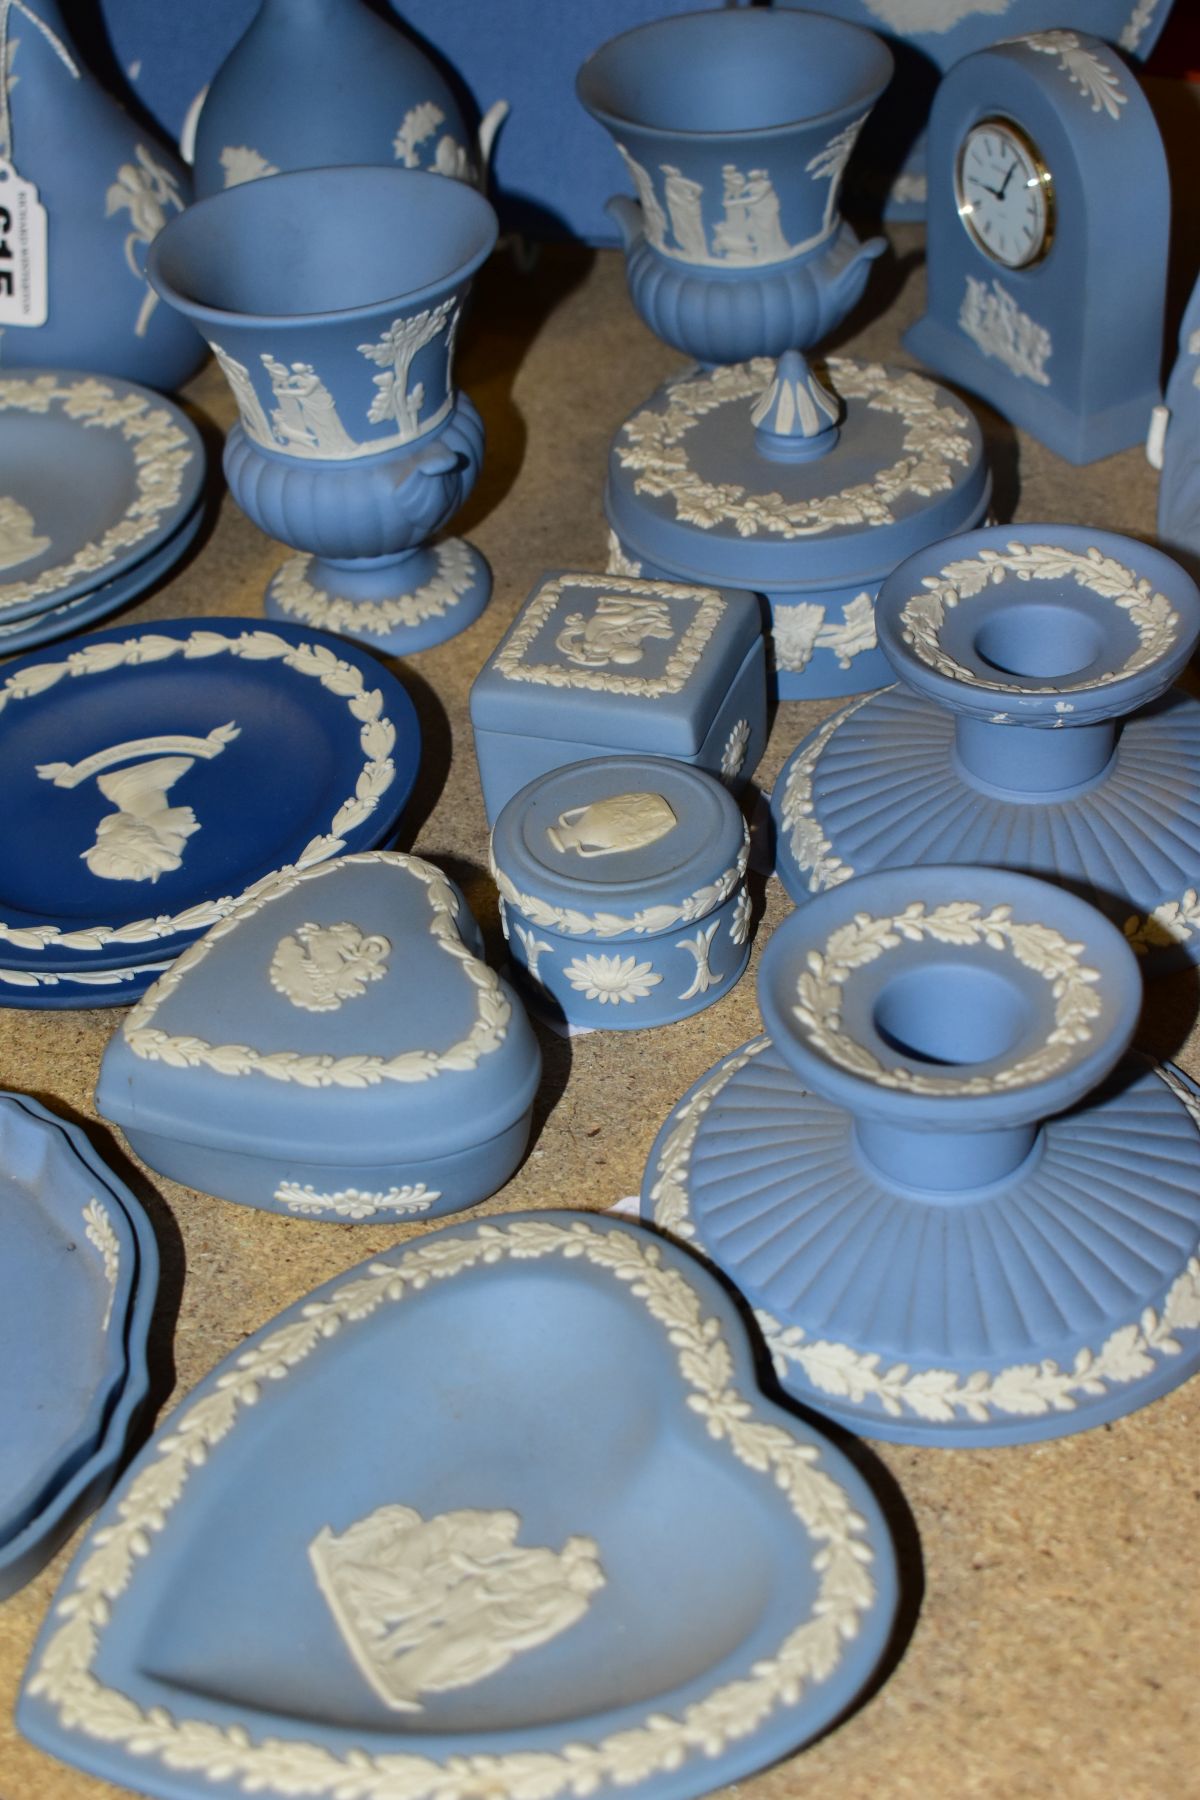 A GROUP OF WEDGWOOD JASPERWARE, mainly pale blue including bud vases, small urn shaped vases, a - Image 6 of 6